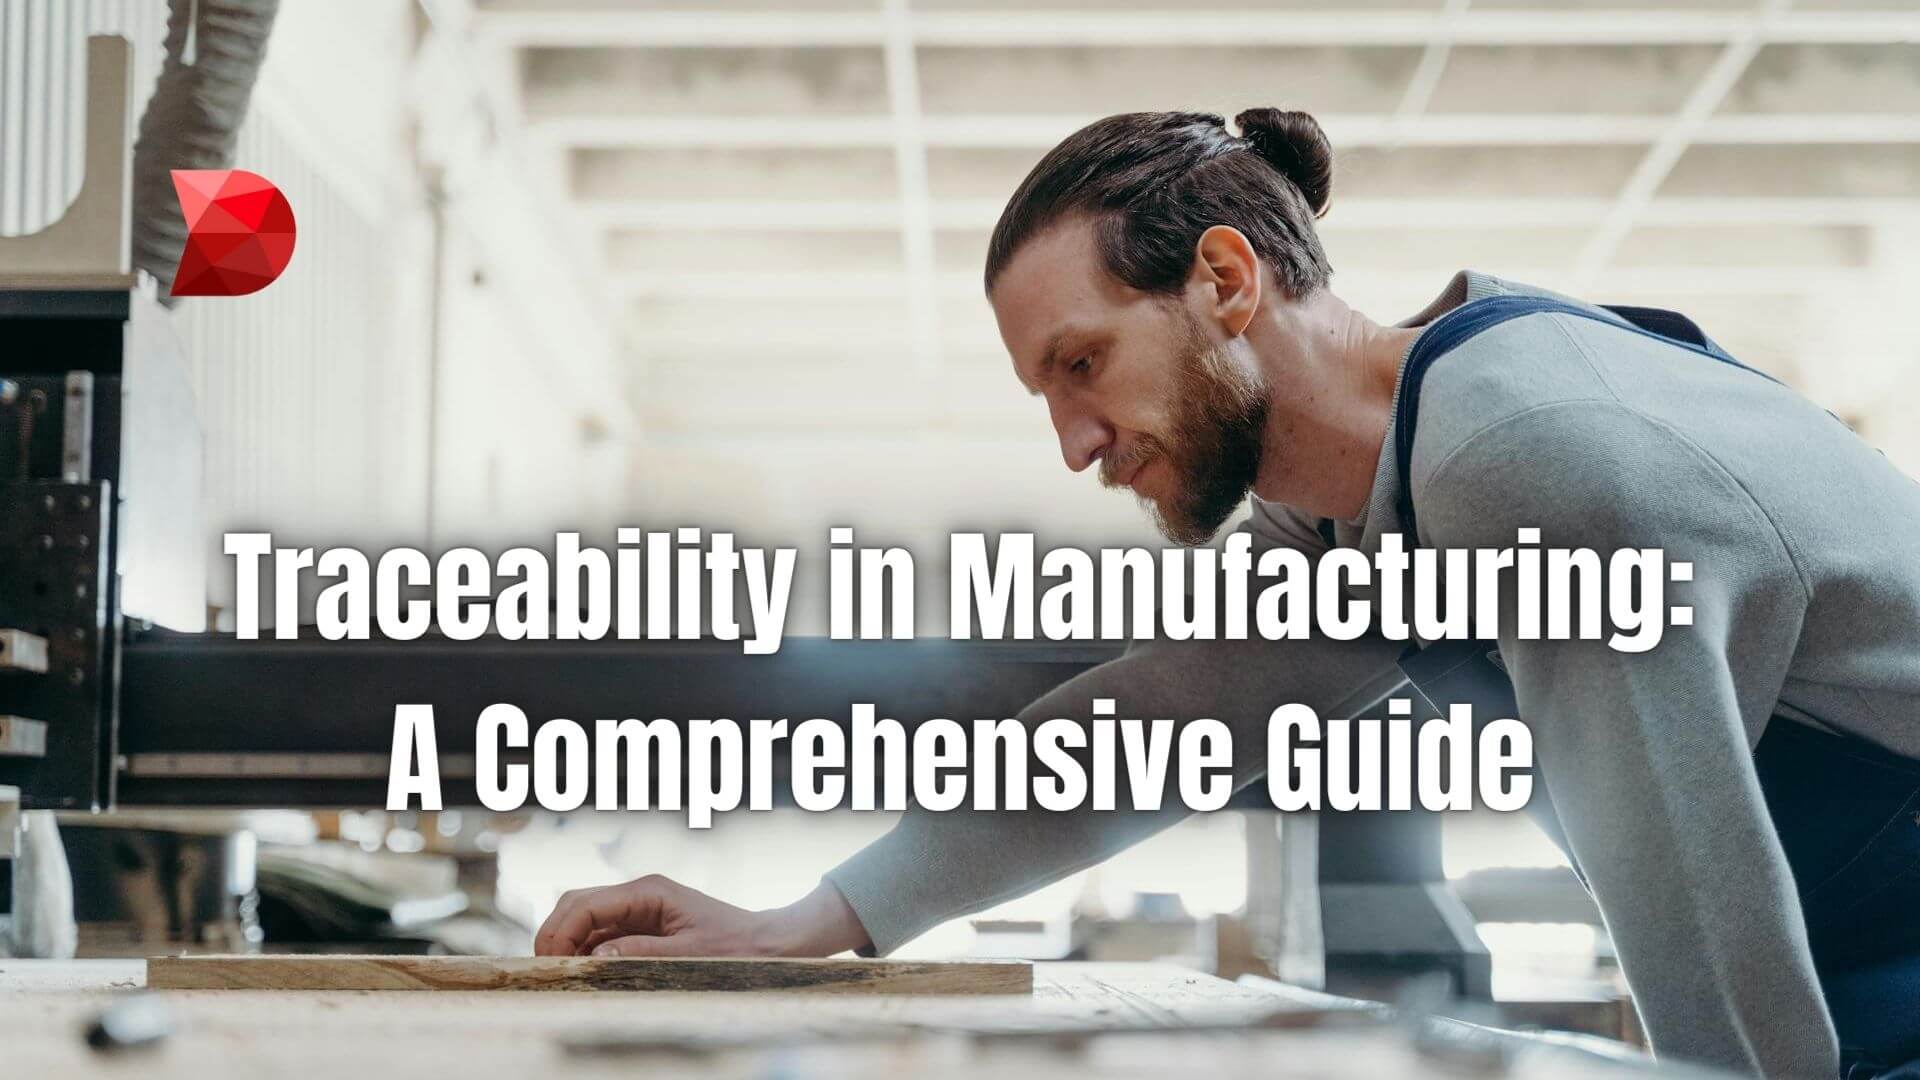 Discover the ultimate resource for mastering traceability in manufacturing. Learn best practices and tools for efficient tracking.